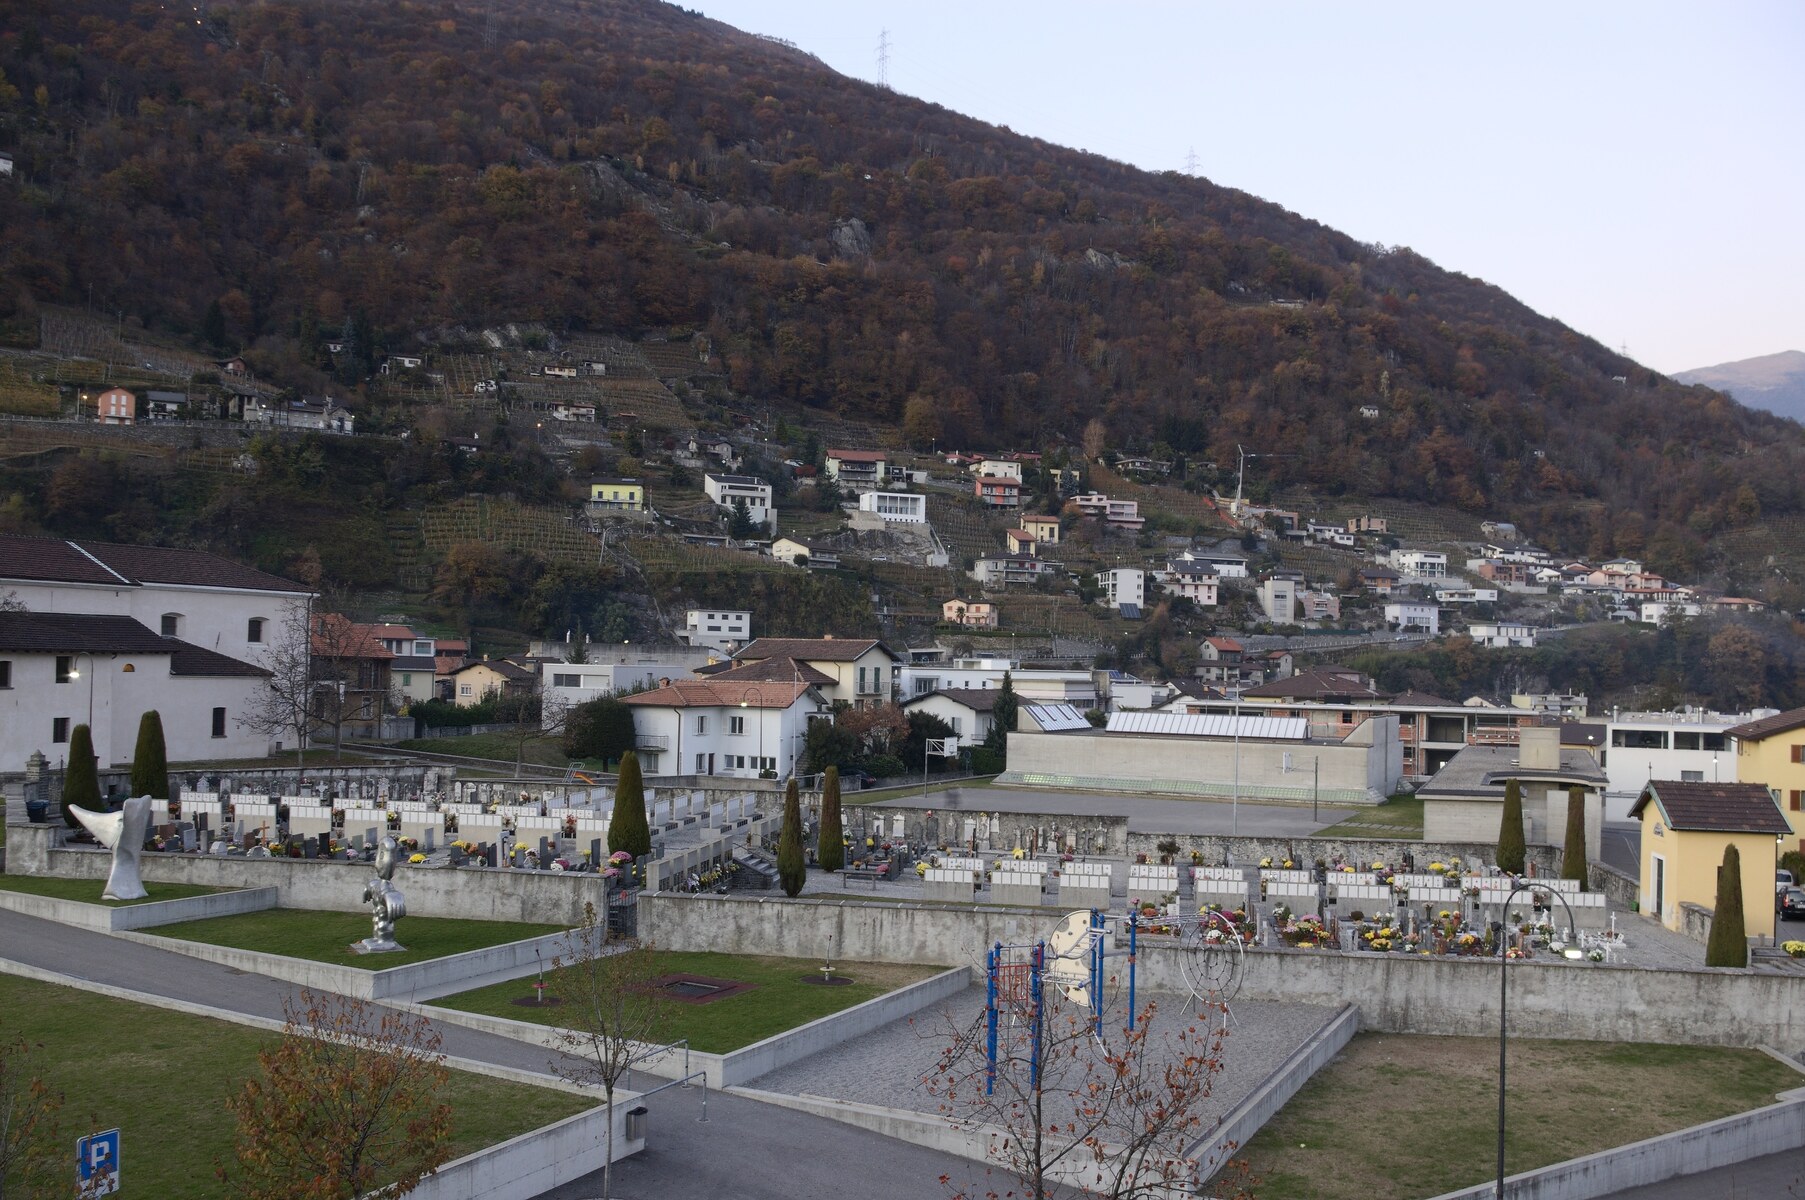 Monte Carasso Cemetary at dusk